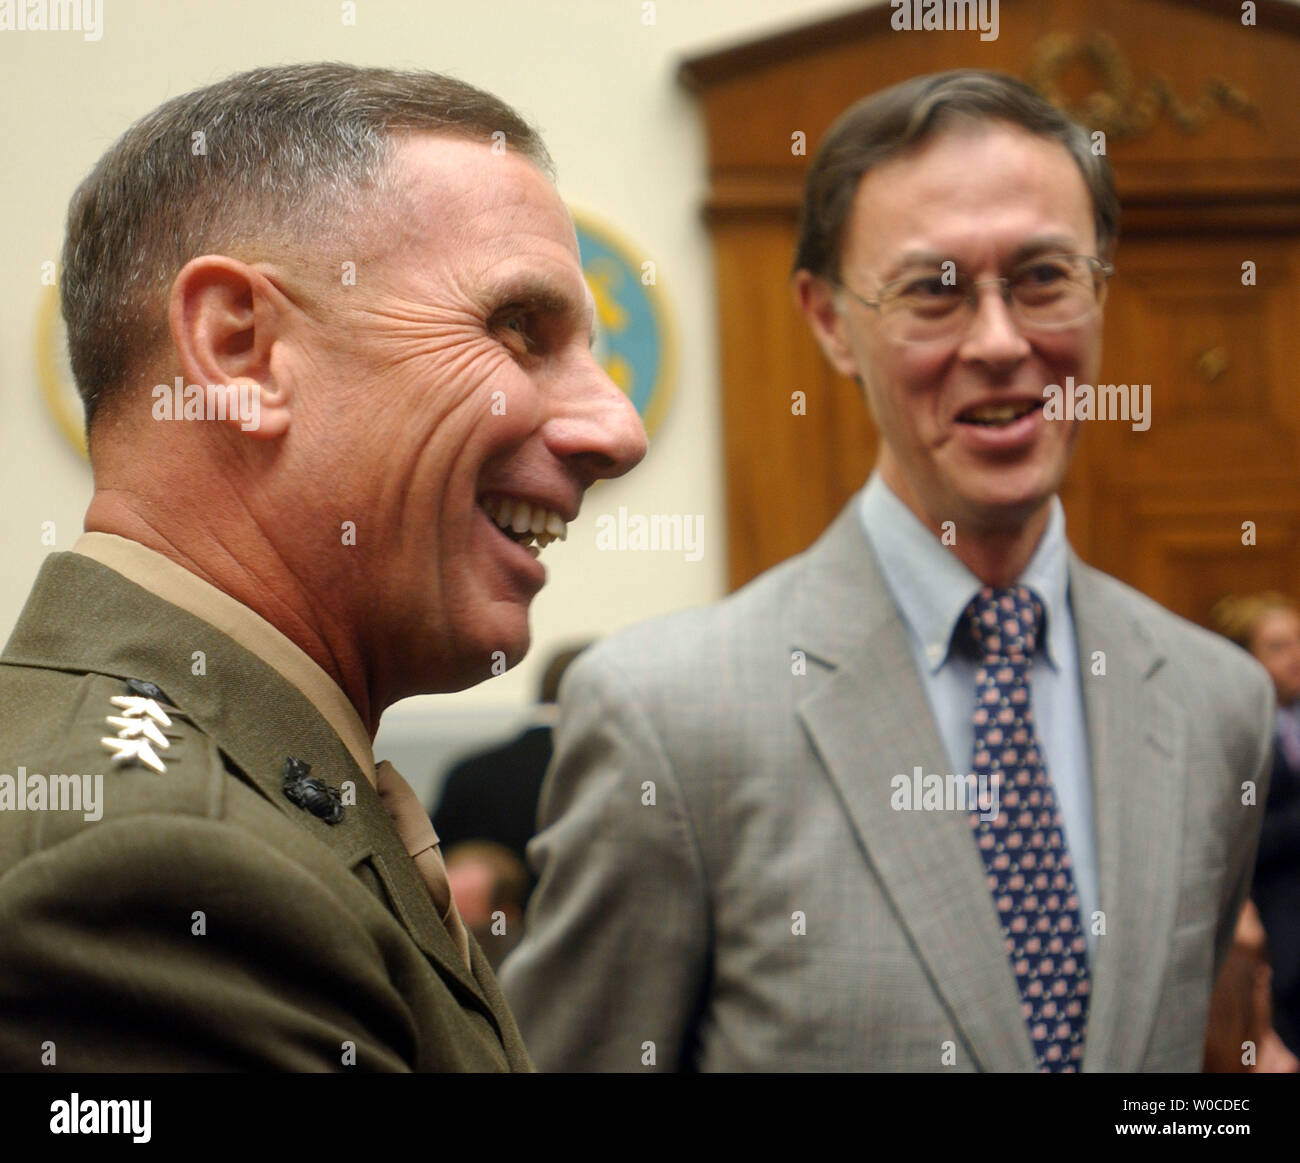 Lieutenant General Jan Huly of the Marine Corps has a laugh with David Chu, Under Secretary of Defense, before the House Armed Services Committee started its hearing on July 7, 2004 in Washington.  The Committee is looking into troop size and strength abroad as well as the readyness of the Reserve at home. (UPI Photo/Michael Kleinfeld) Stock Photo